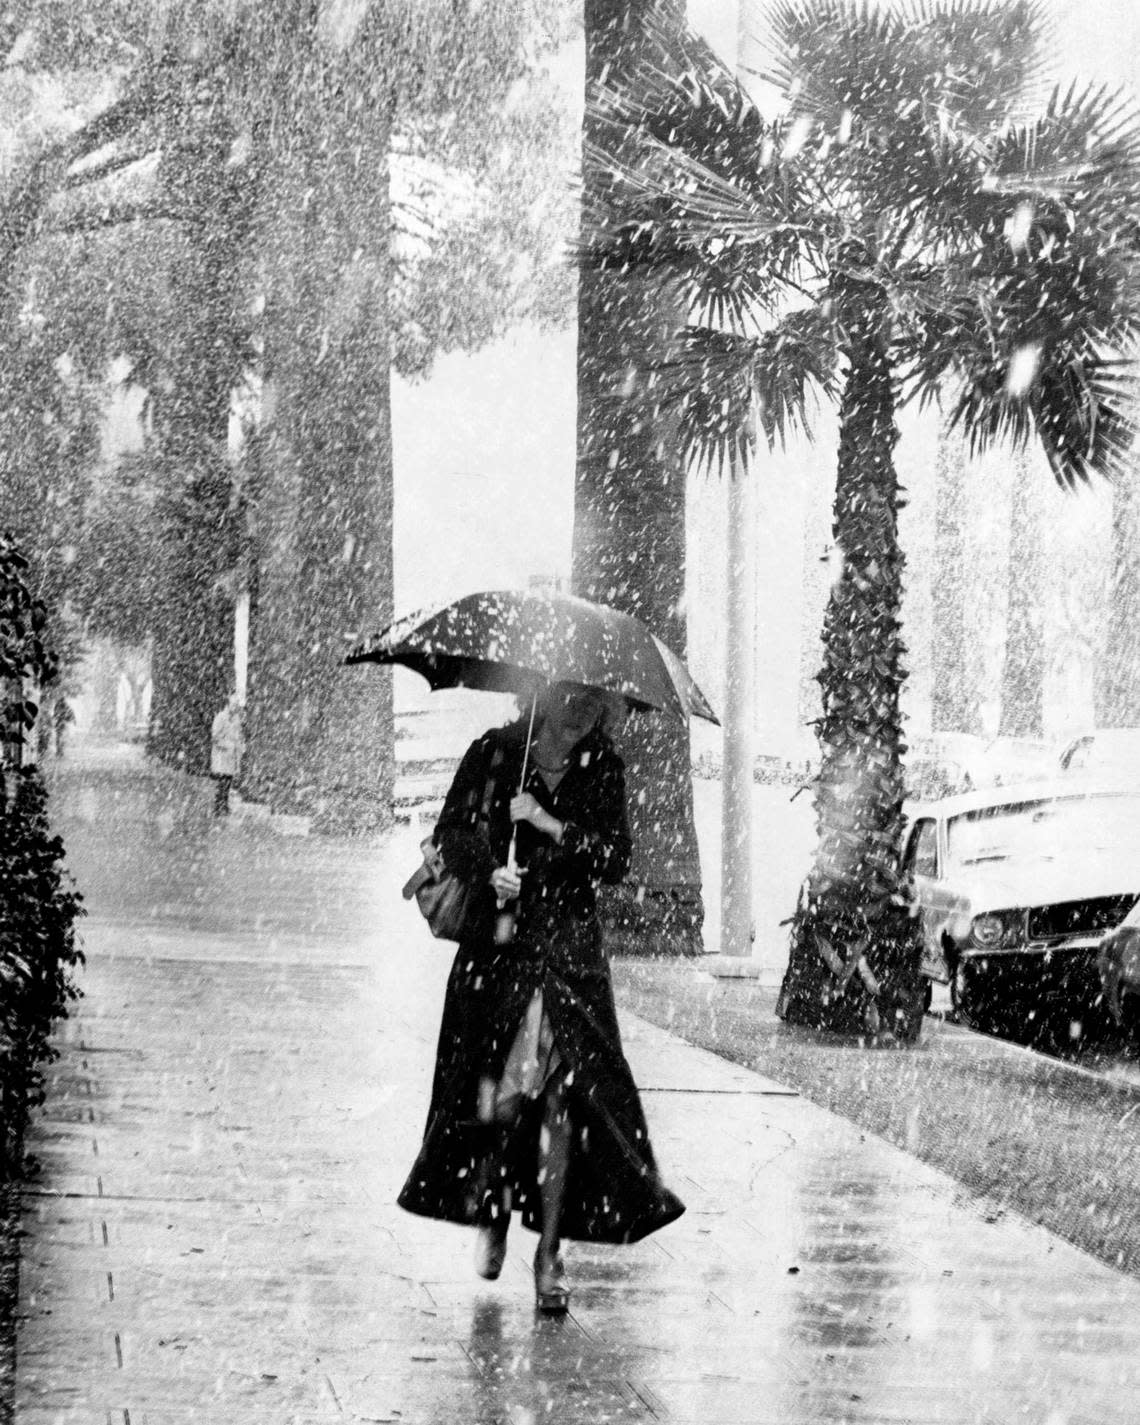 A Sacramento resident tries to get some protection from the weather as snow falls amid downtown Sacramento palm trees on Feb. 5, 1976. Harlin Smith/Sacramento Bee file